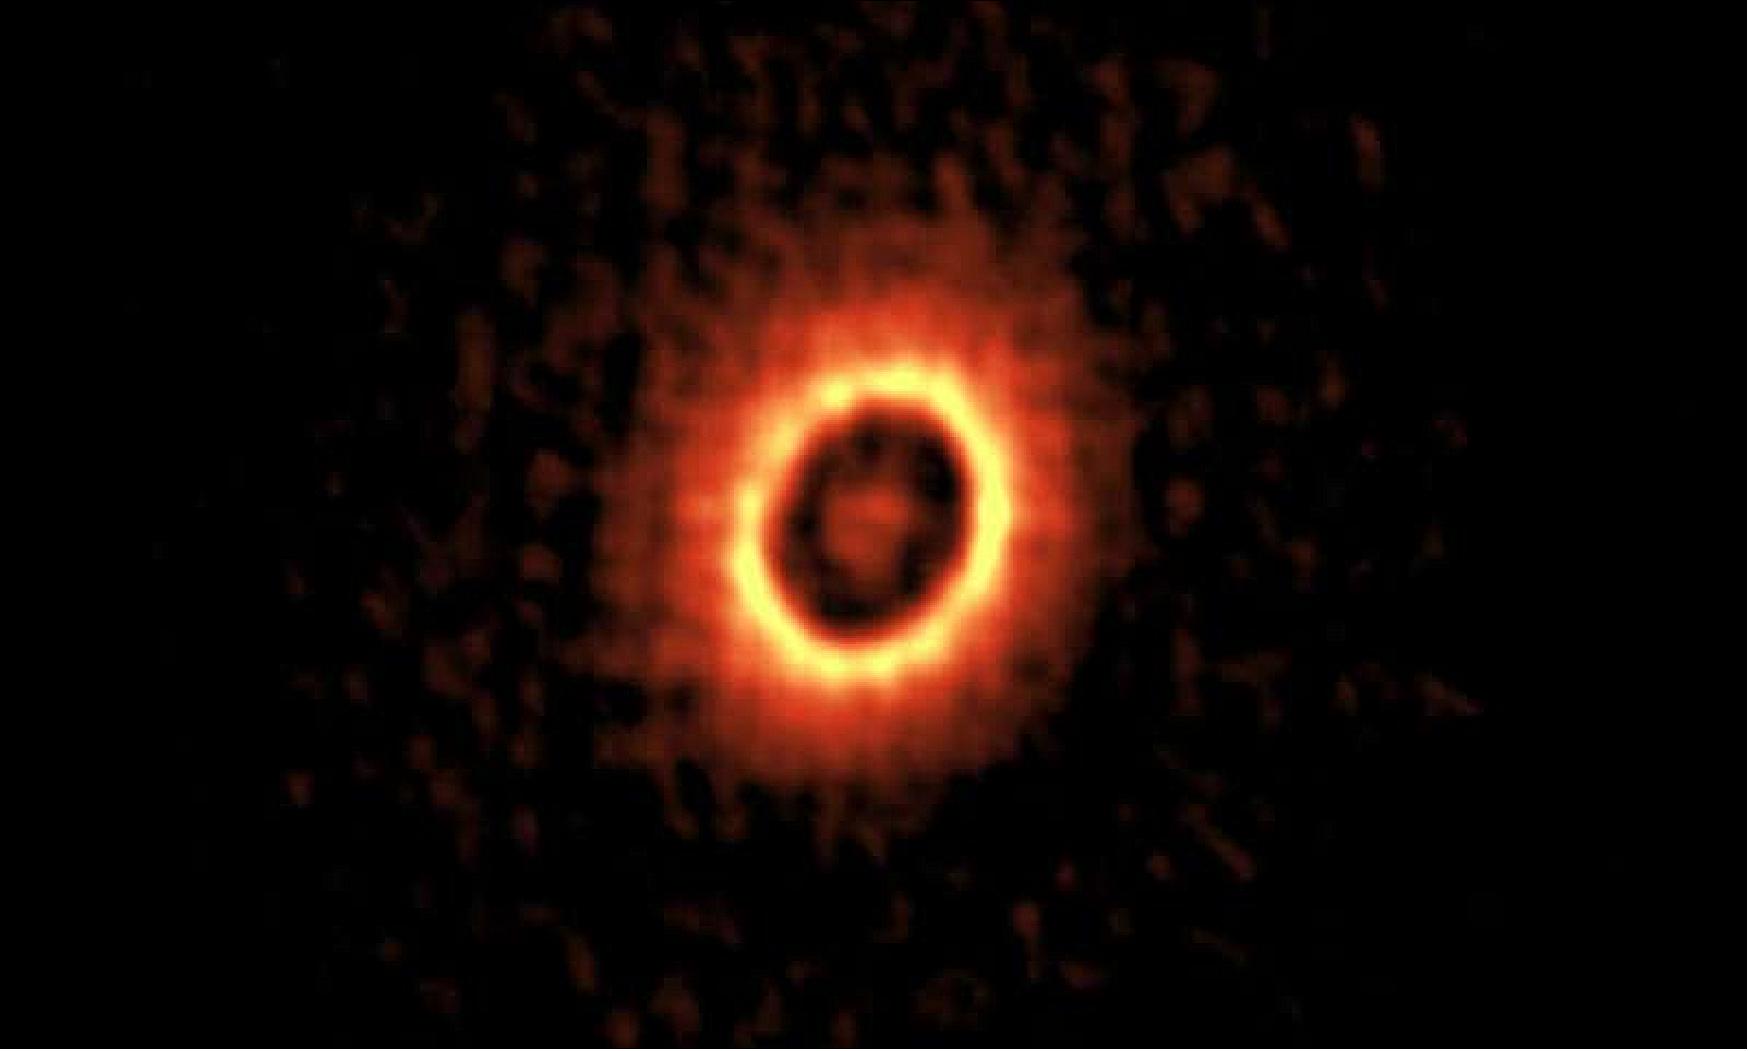 Figure 98: ALMA image of the dusty disk around the young star DM Tau. You can see two concentric rings where planets may be forming (image credit: ALMA (ESO/NAOJ/NRAO), Kudo et al.)